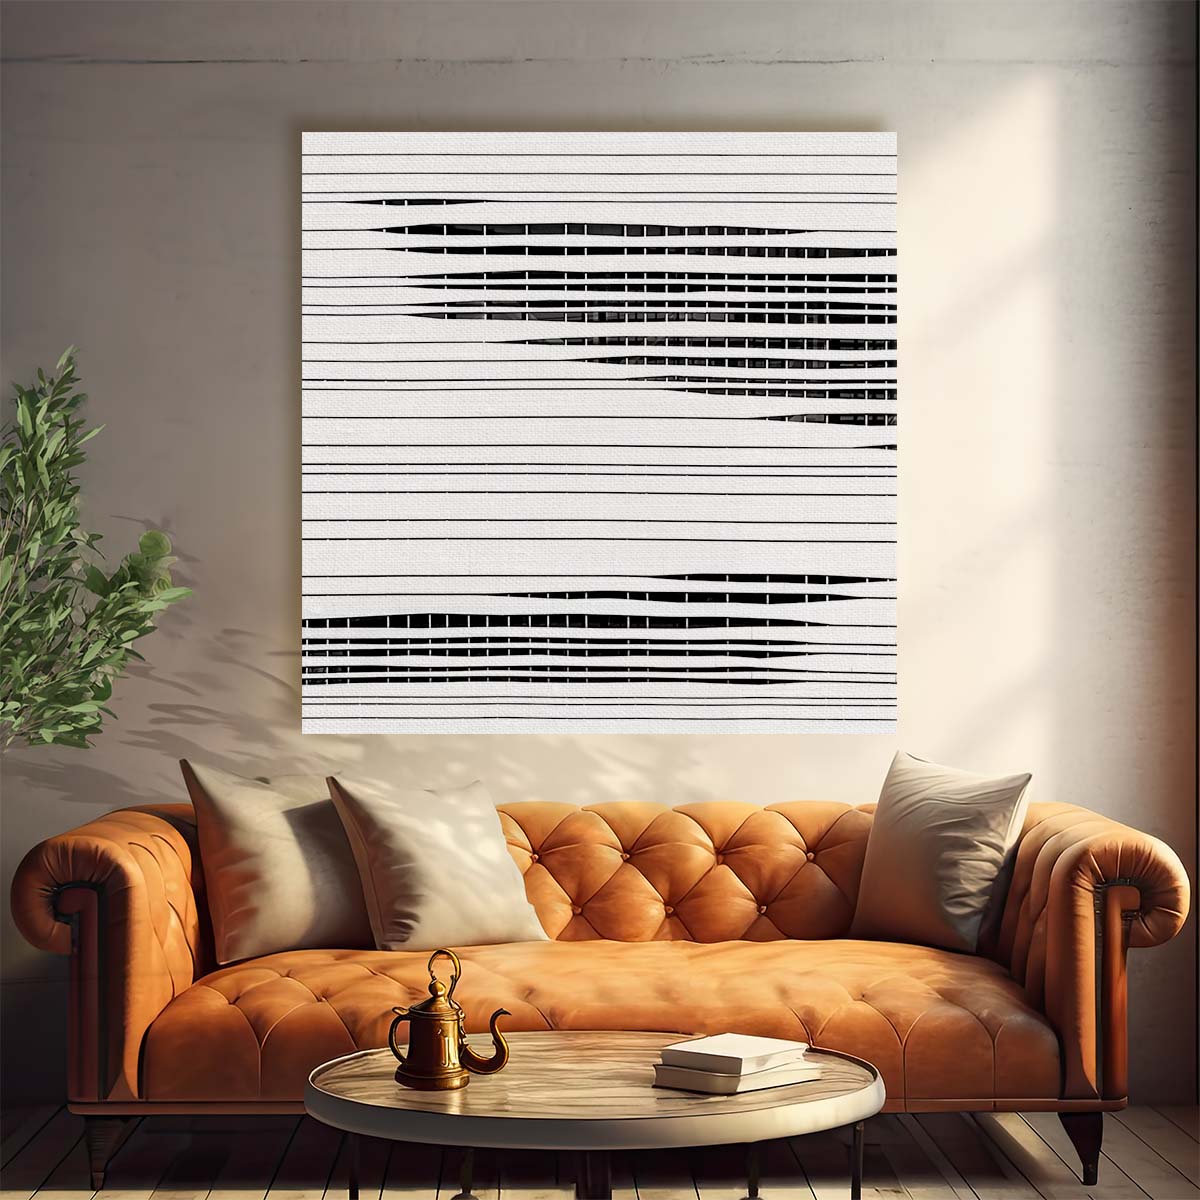 Contemporary Monochrome Geometric Lines & Patterns Architectural Wall Art by Luxuriance Designs. Made in USA.